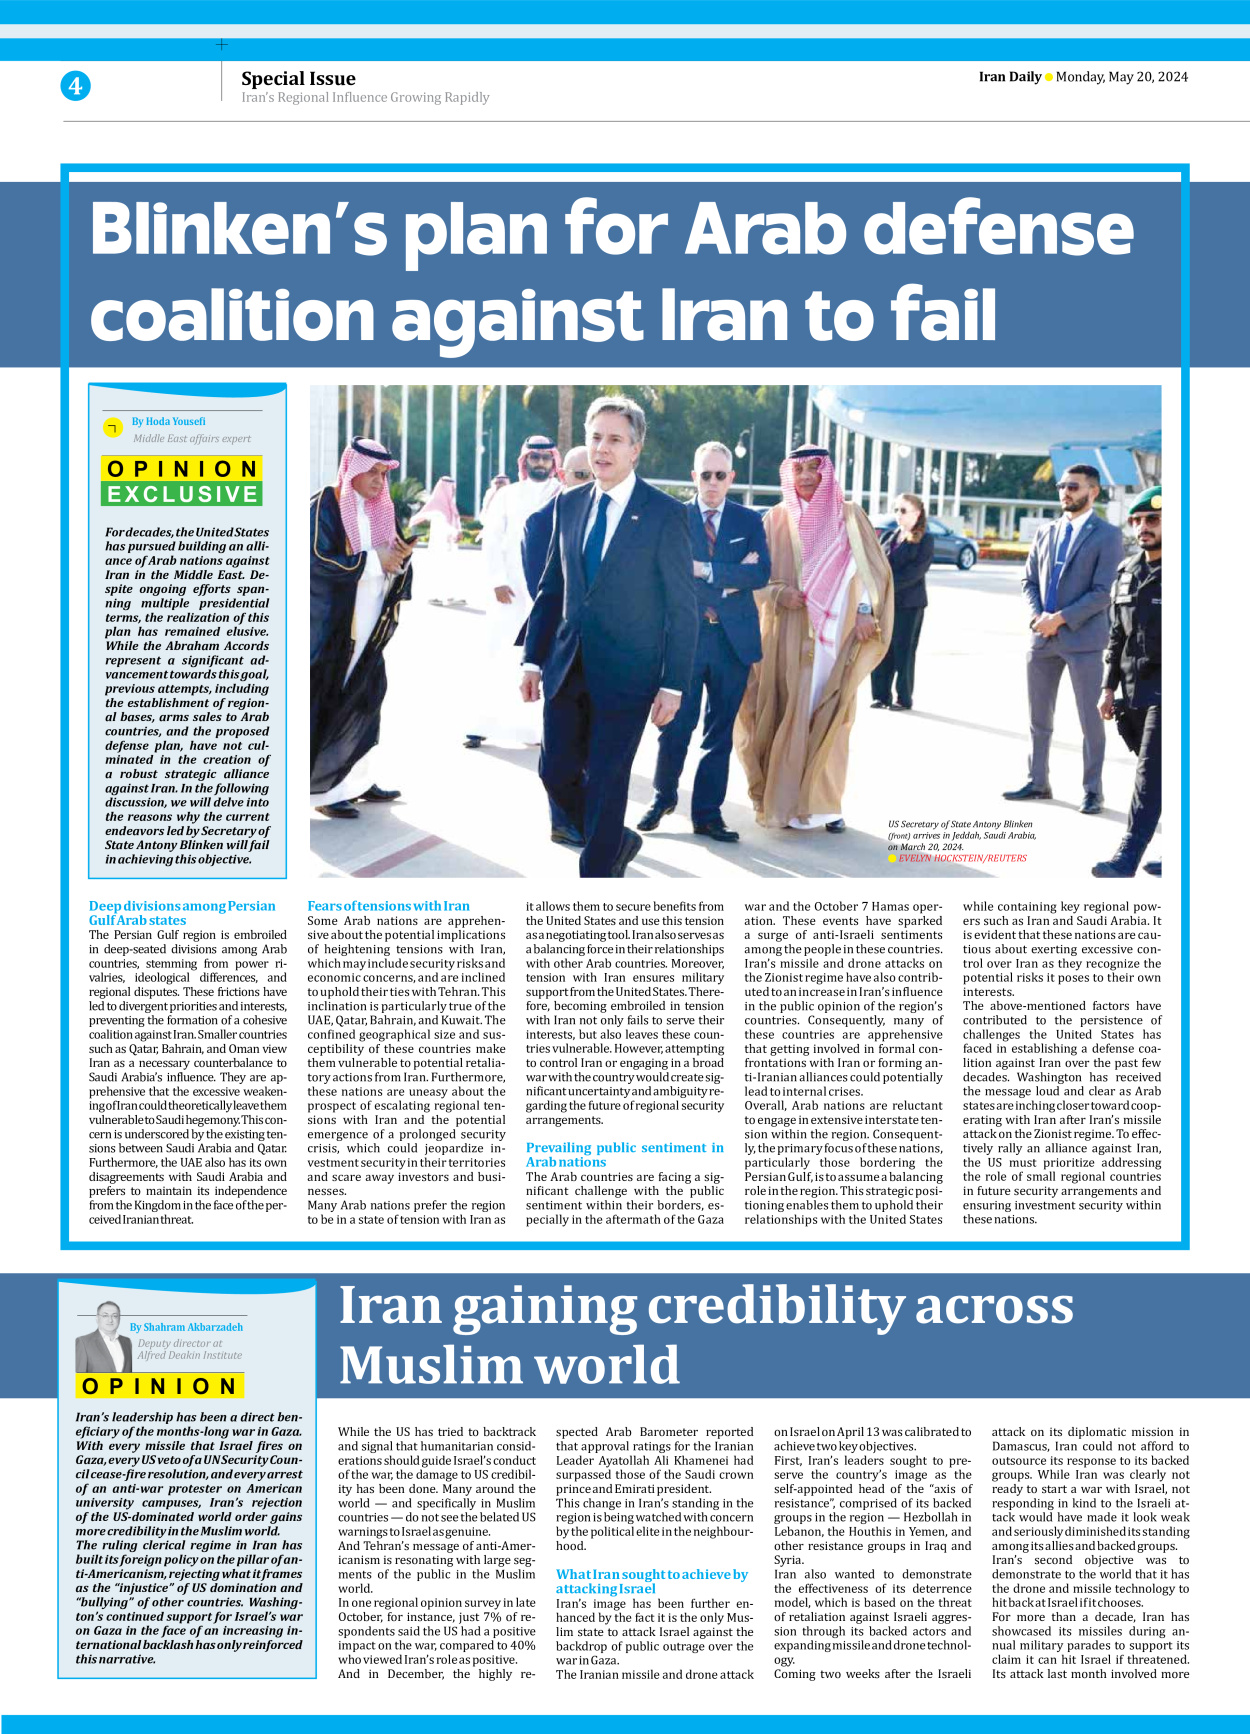 Iran Daily - Number Seven Thousand Five Hundred and Sixty Two - 19 May 2024 - Page 4